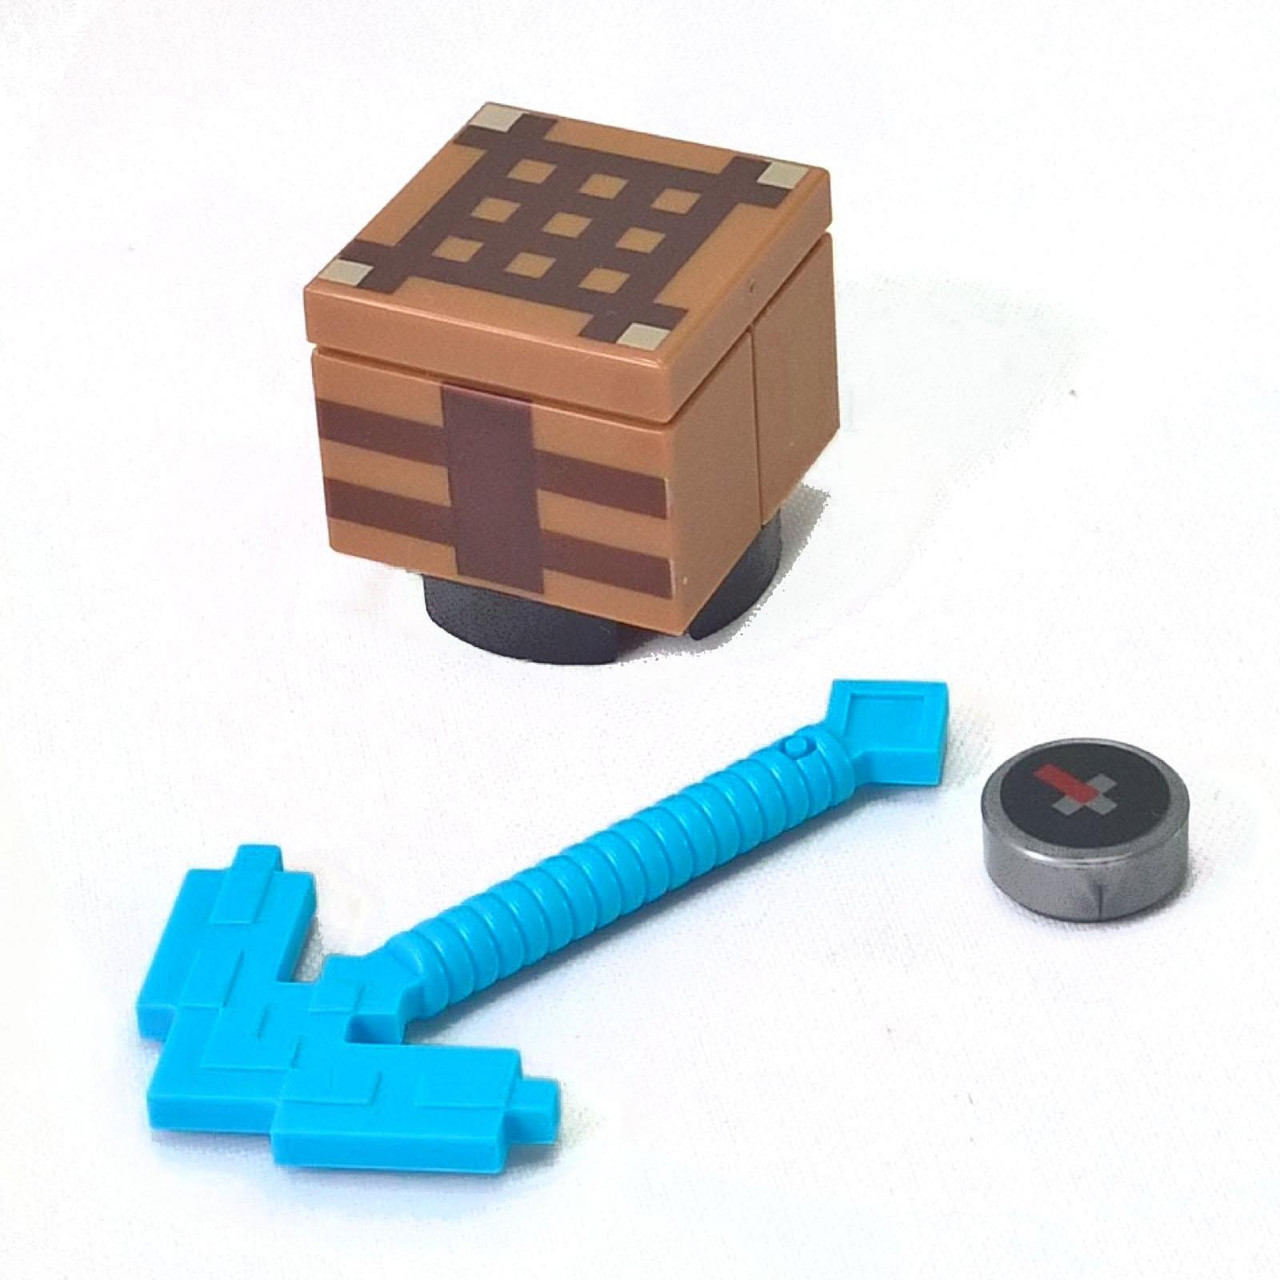 3 Minecraft Accessories pickaxe, table and compass - Online LEGO® Store. We pick bricks with care.